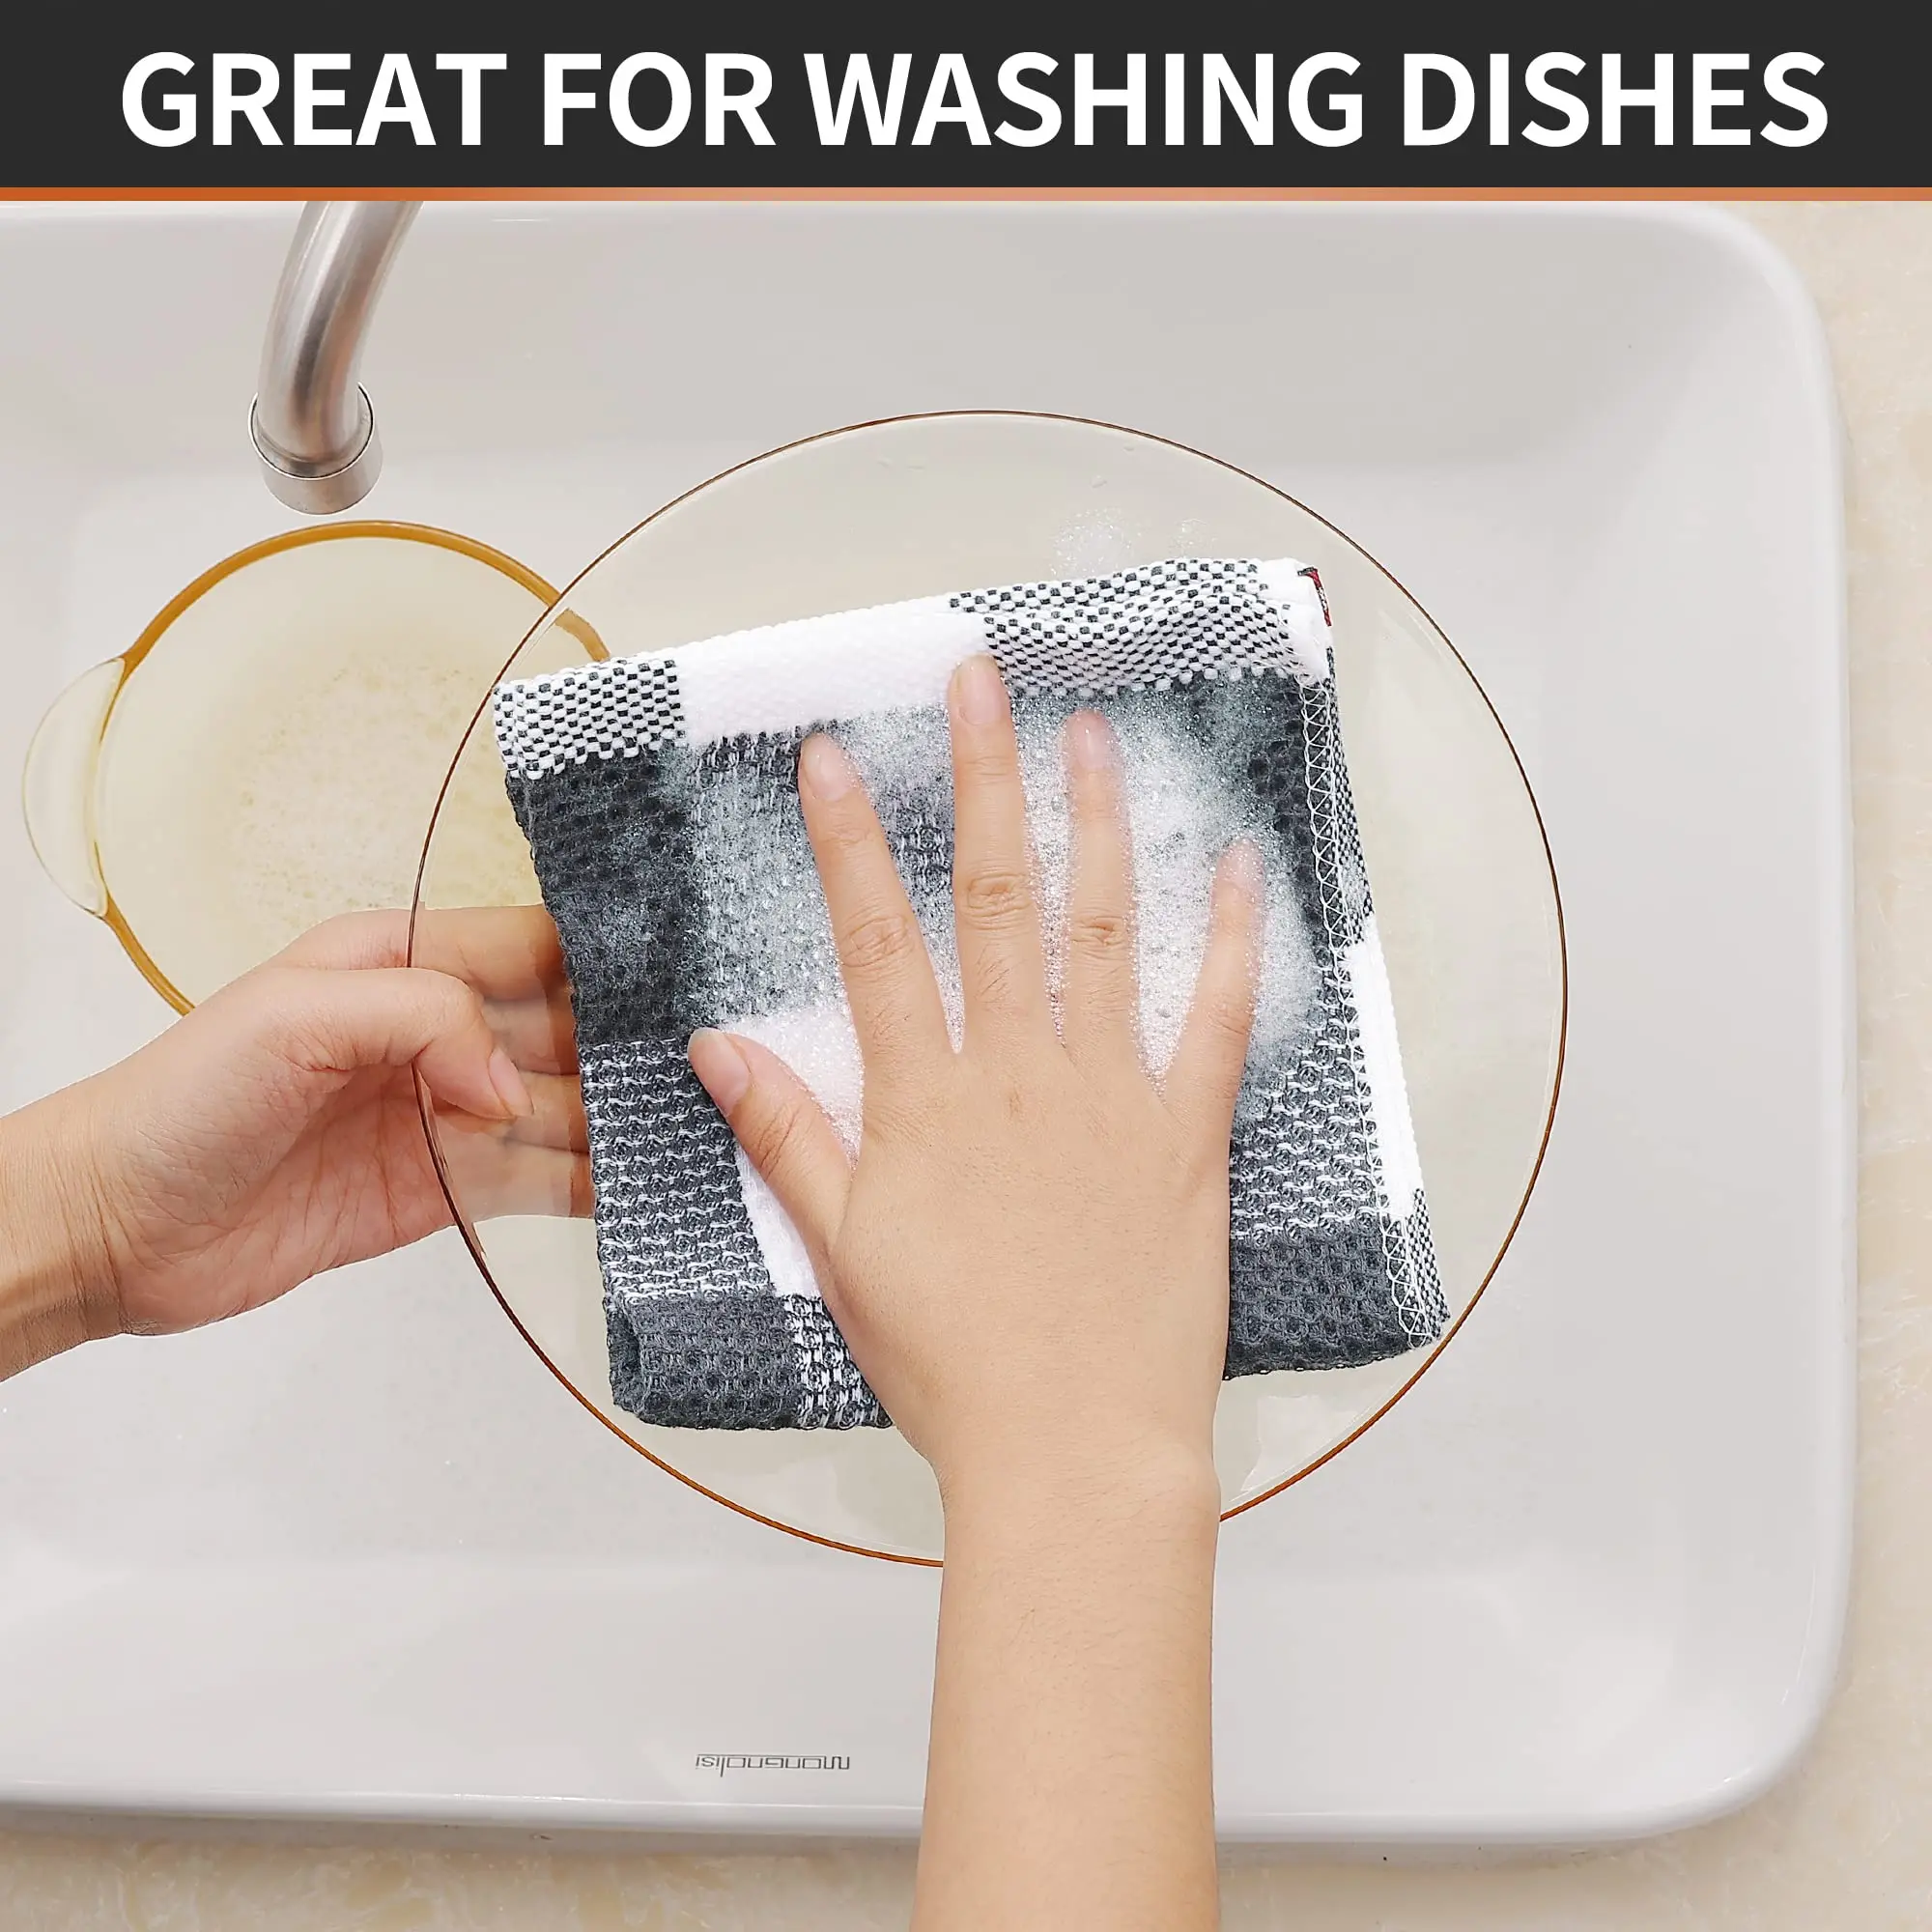 https://ae01.alicdn.com/kf/Sb8611e5c7f594077bbd420d8cc42b636q/Homaxy-100-Cotton-Kitchen-Towel-Waffle-Weave-Check-Towel-Absorbent-Dishcloth-Super-Soft-Kitchen-Cloths-Household.jpg